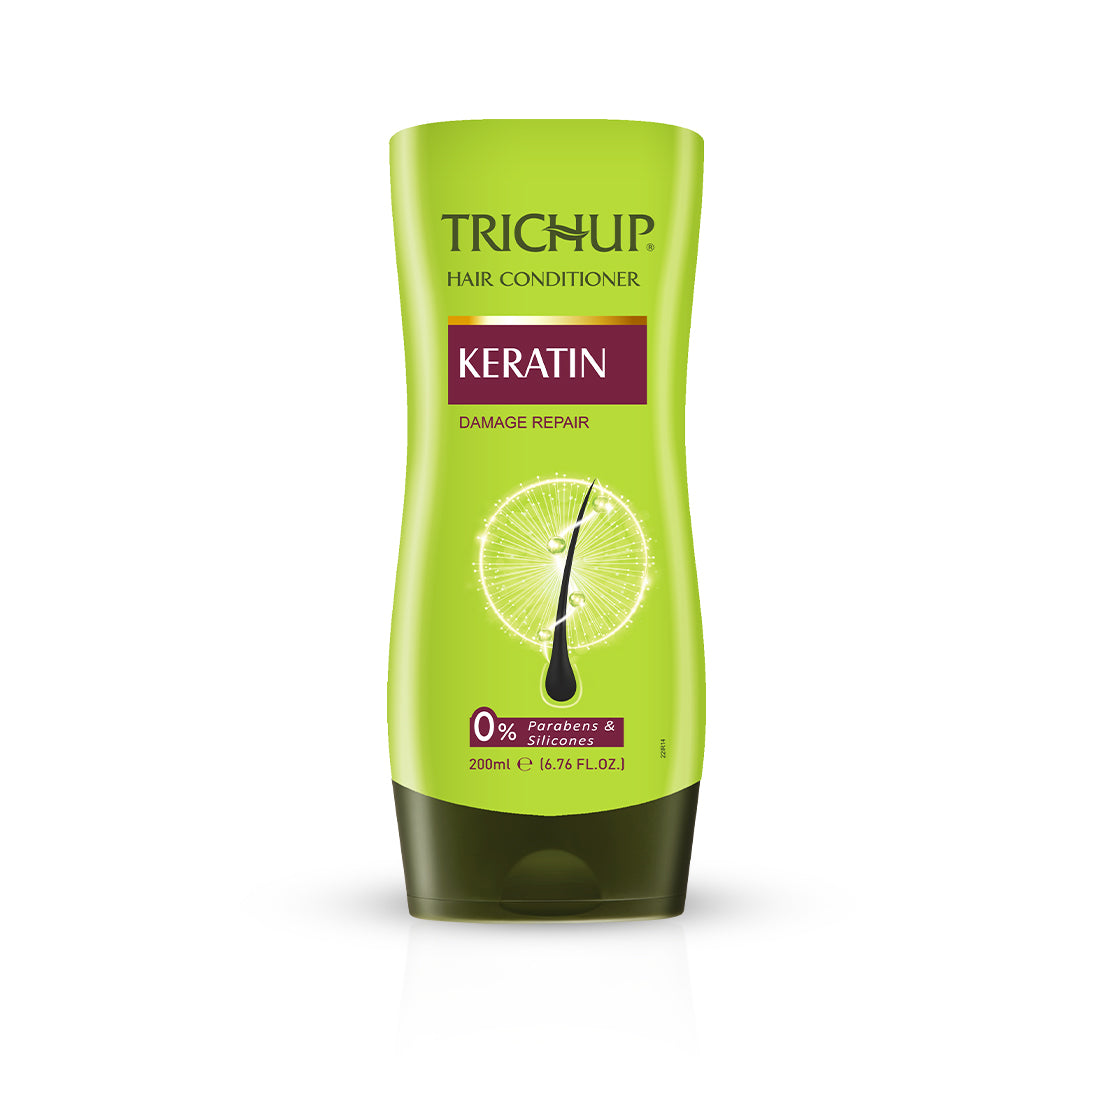 Trichup Keratin Hair Conditioner - For Damaged Hair Repair - Rebuild Strength, Returns Elasticity & Reduces Breakage - Get Healthy, Shiny and Frizz-free Hair